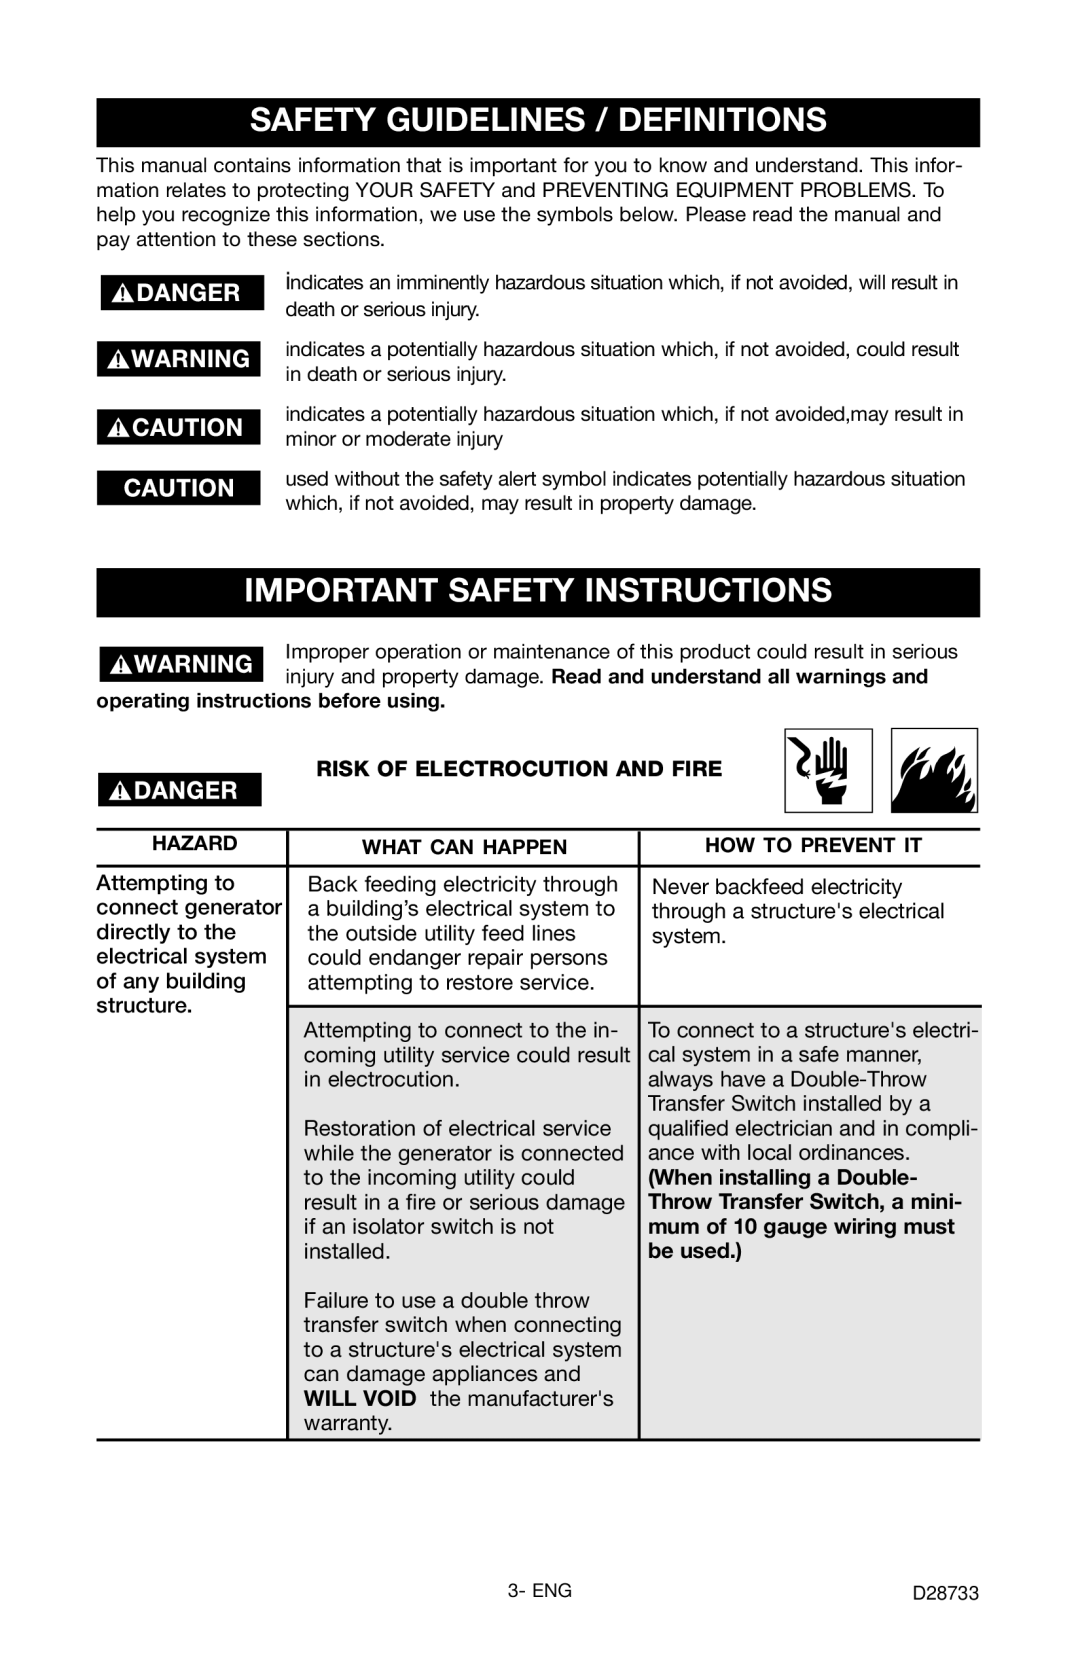 Porter-Cable D28733-034-0 Safety Guidelines / Definitions, Important Safety Instructions, Risk Of Electrocution And Fire 